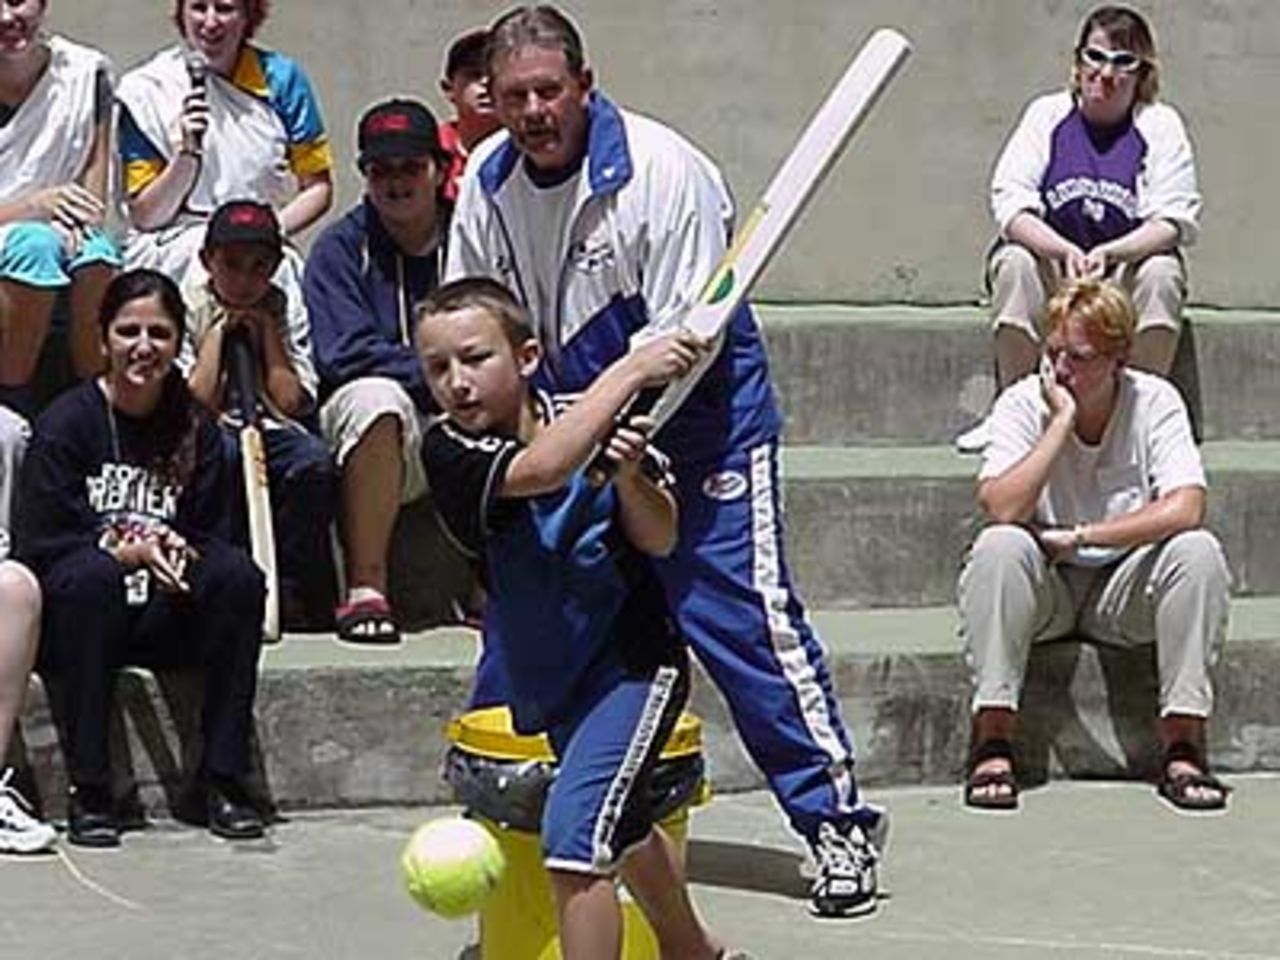 24 Oct 2002: New South Wales coach Steve Rixon keeps wickets in a fun game that the SpeedBlitzBlues played at the Sydney Children's Hospital, Randwick for International Children's Day